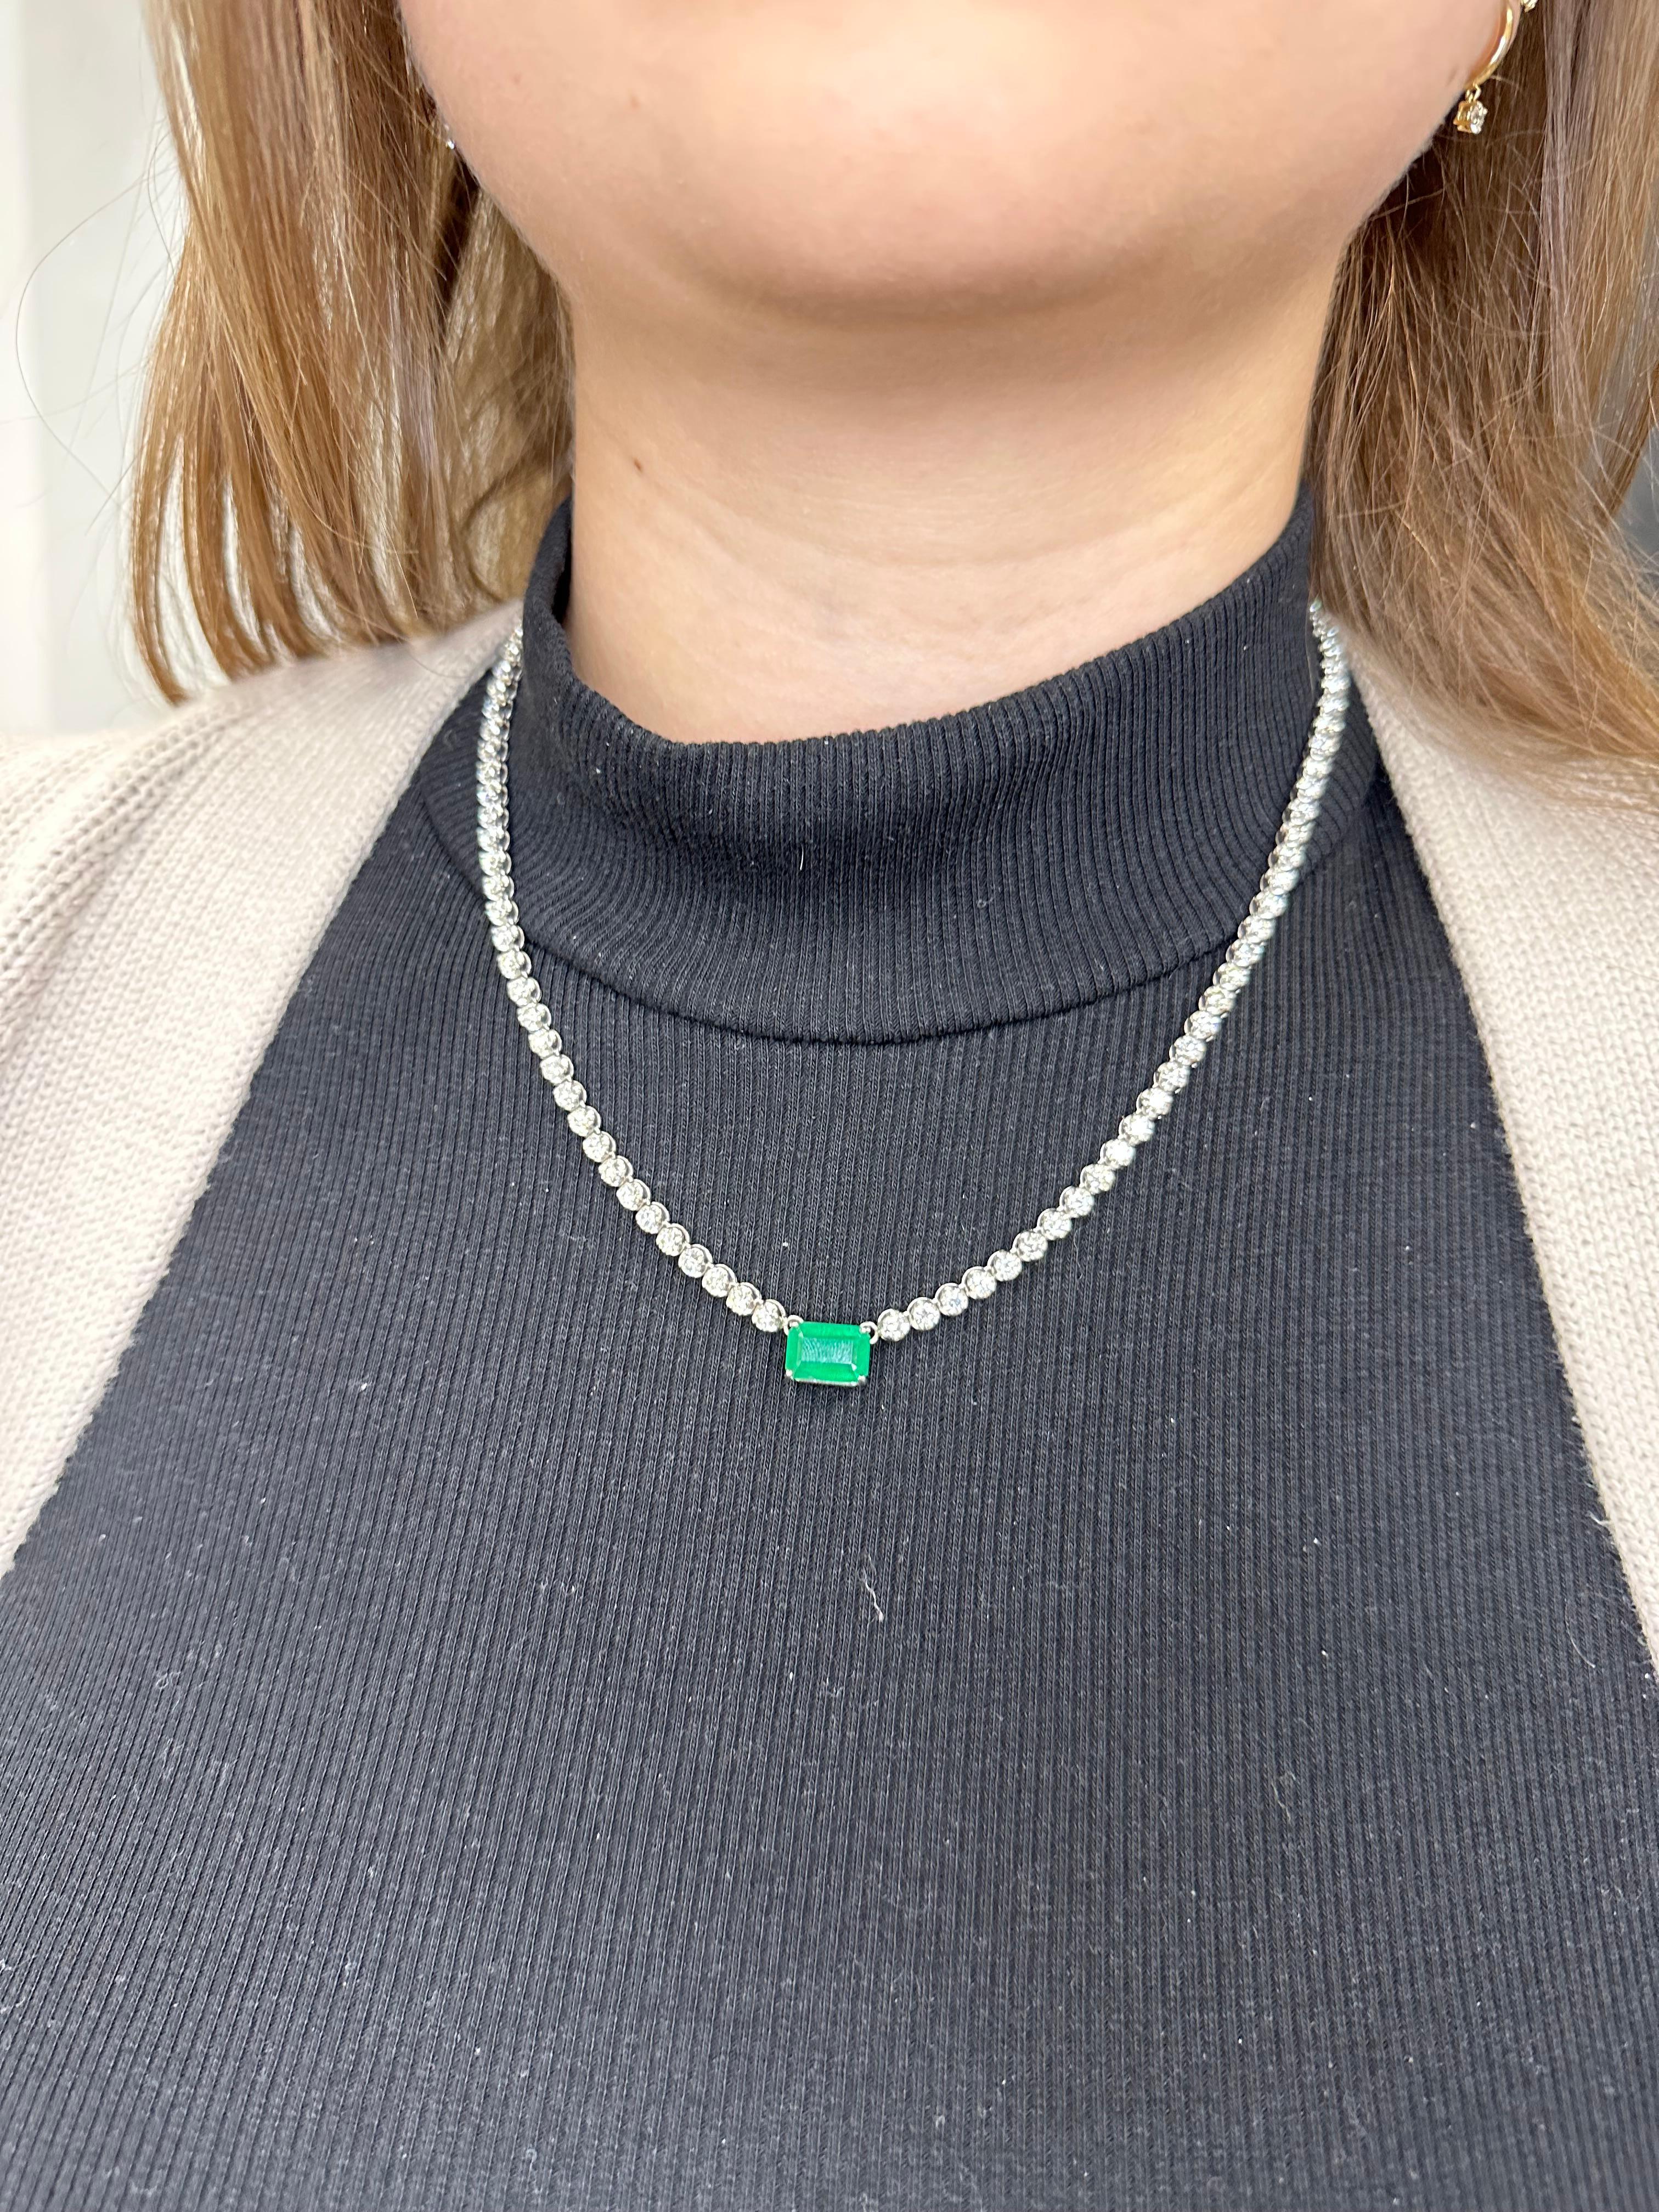 Women's 11.24 C.T.W. Emerald and Diamond Tennis Necklace 14k White Gold For Sale